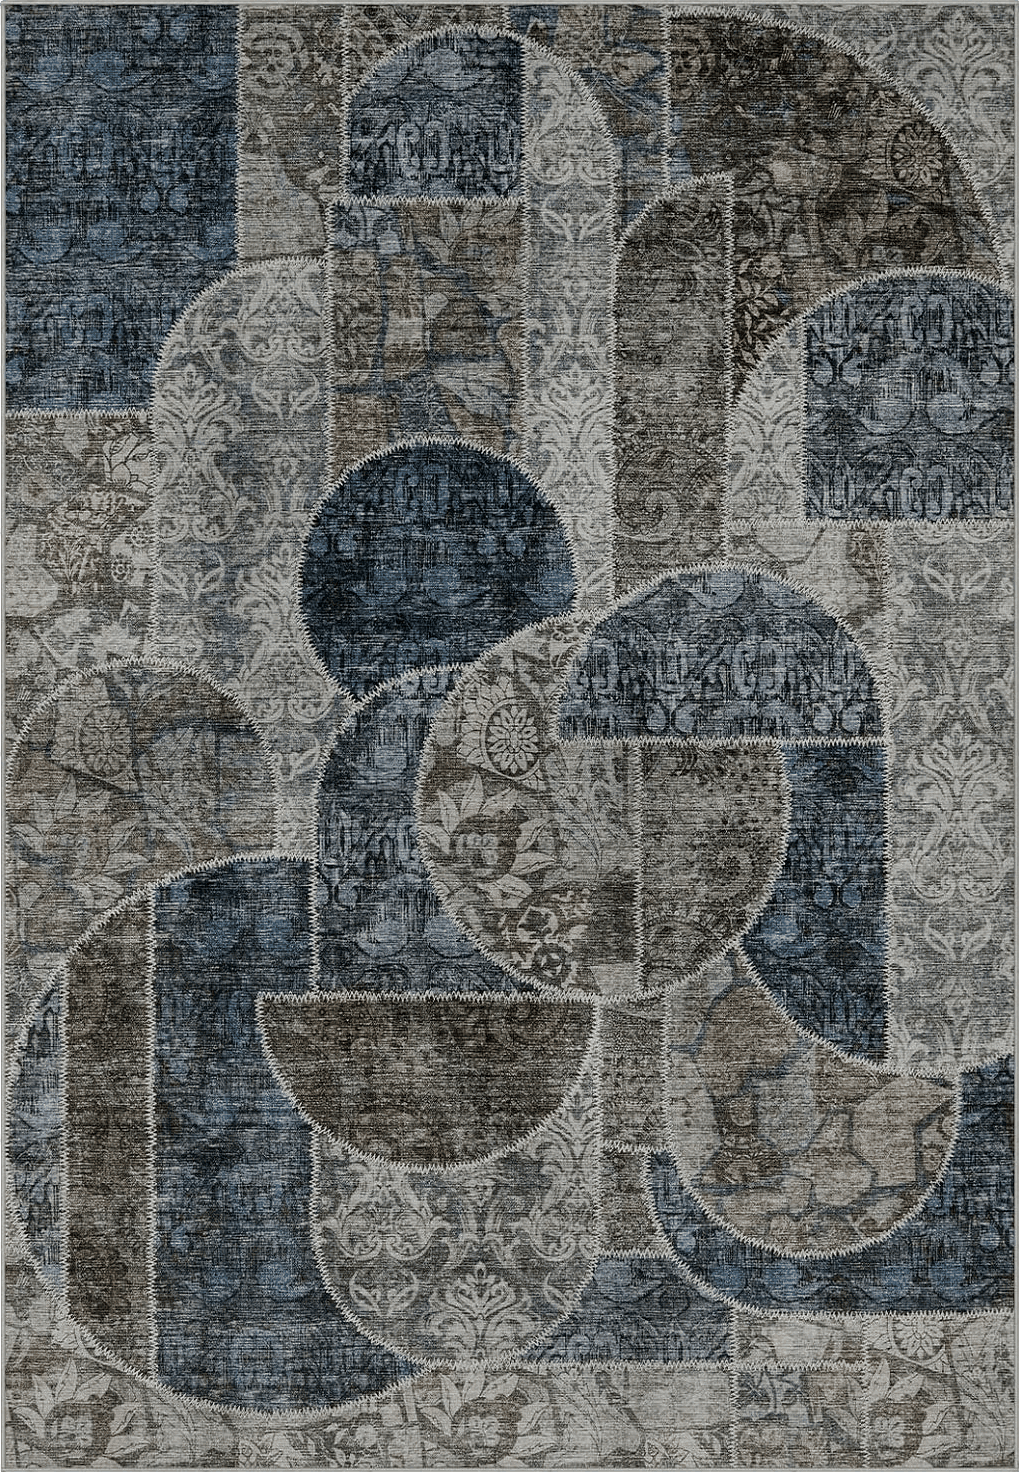 Area 9x12 9x12 Area Rugs for Living Room Bedroom, Machine Washable Rug with Low Pile Non-Slip Backing, Soft Large Area Rug Vintage Patchwork Indoor Floor Carpet for Dining Room Nursery Office-Blue/Grey